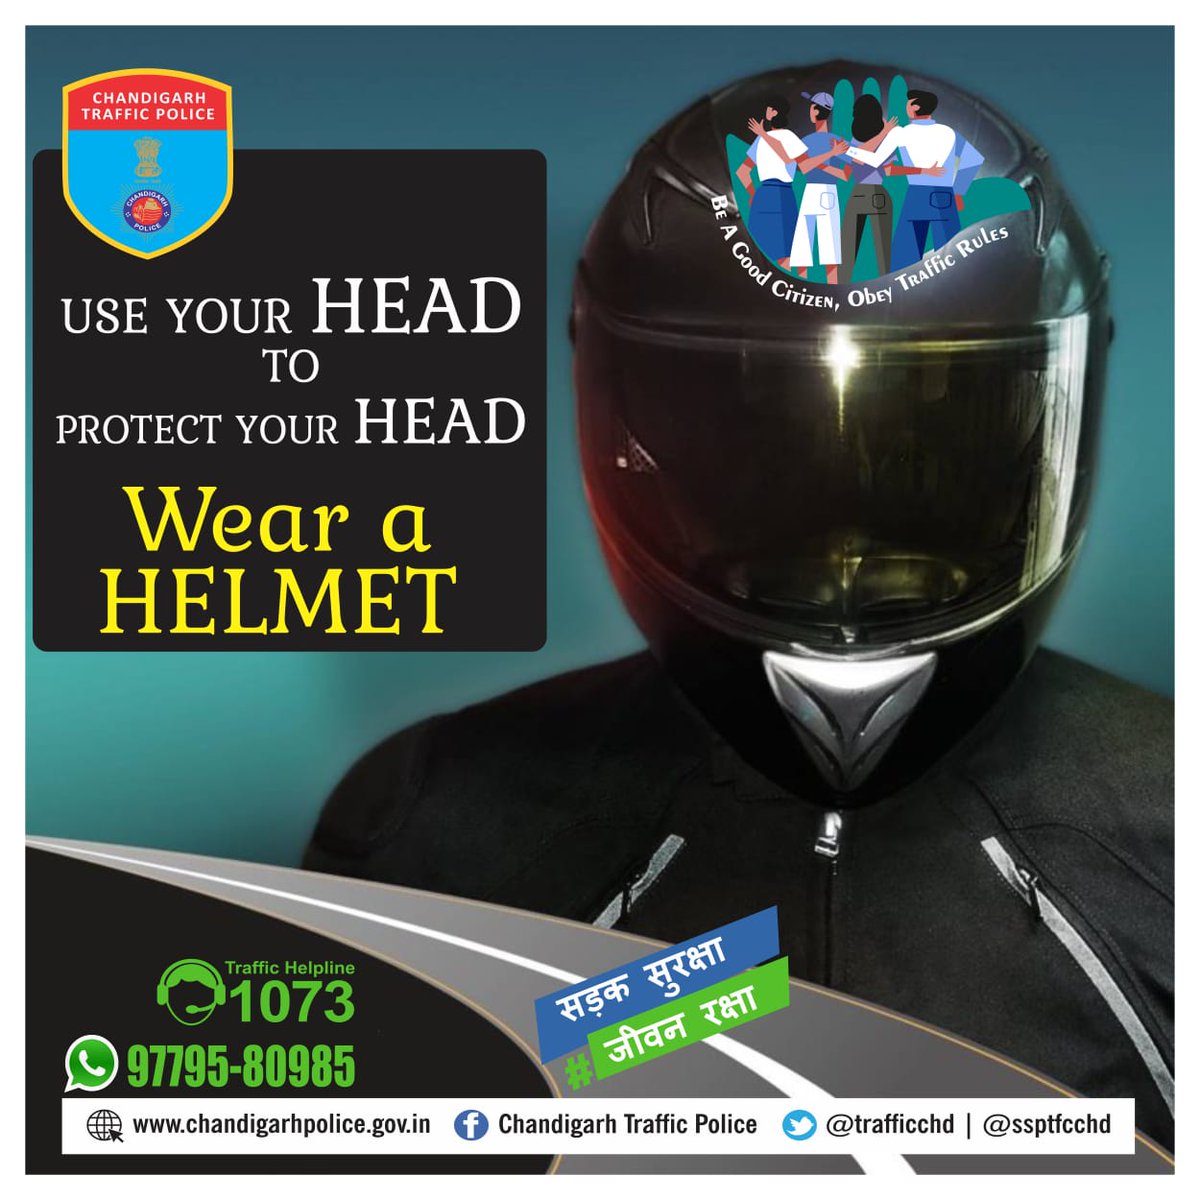 #EveryLifeIsPrecious

Safety Head Gear #helmet protect from #headinjury, always wear your Helmet when Riding two-wheeler!!
Don’t make your life tough, Be an inspiration for others.

#wearhelmet #protecthead #ridesafety #staysafe
#WeCareForYou